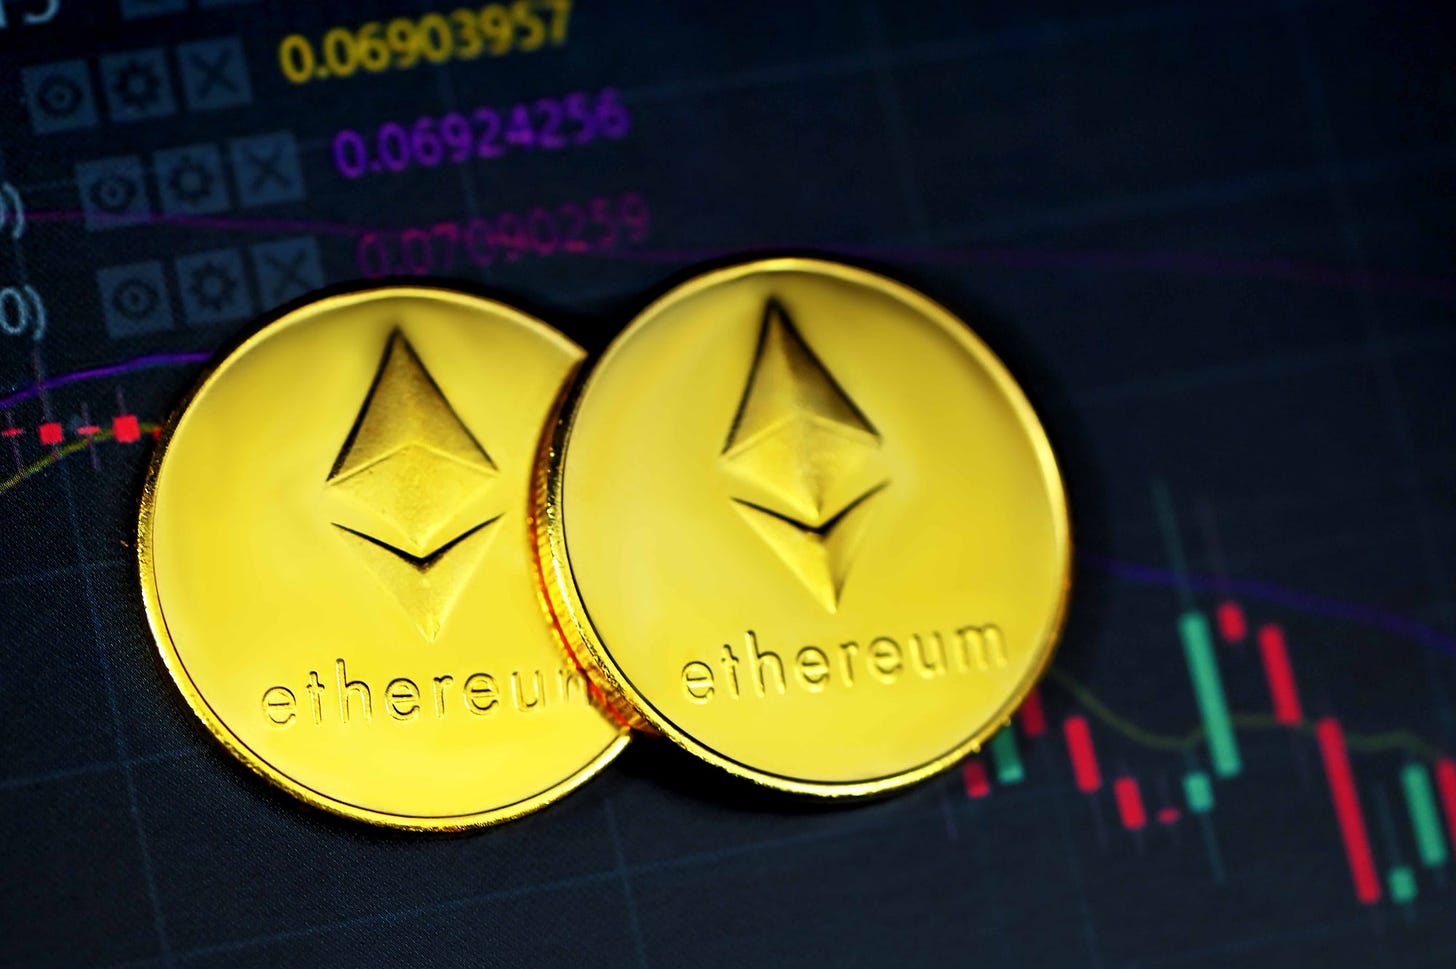 Ethereum fees are too high for mass-market applications